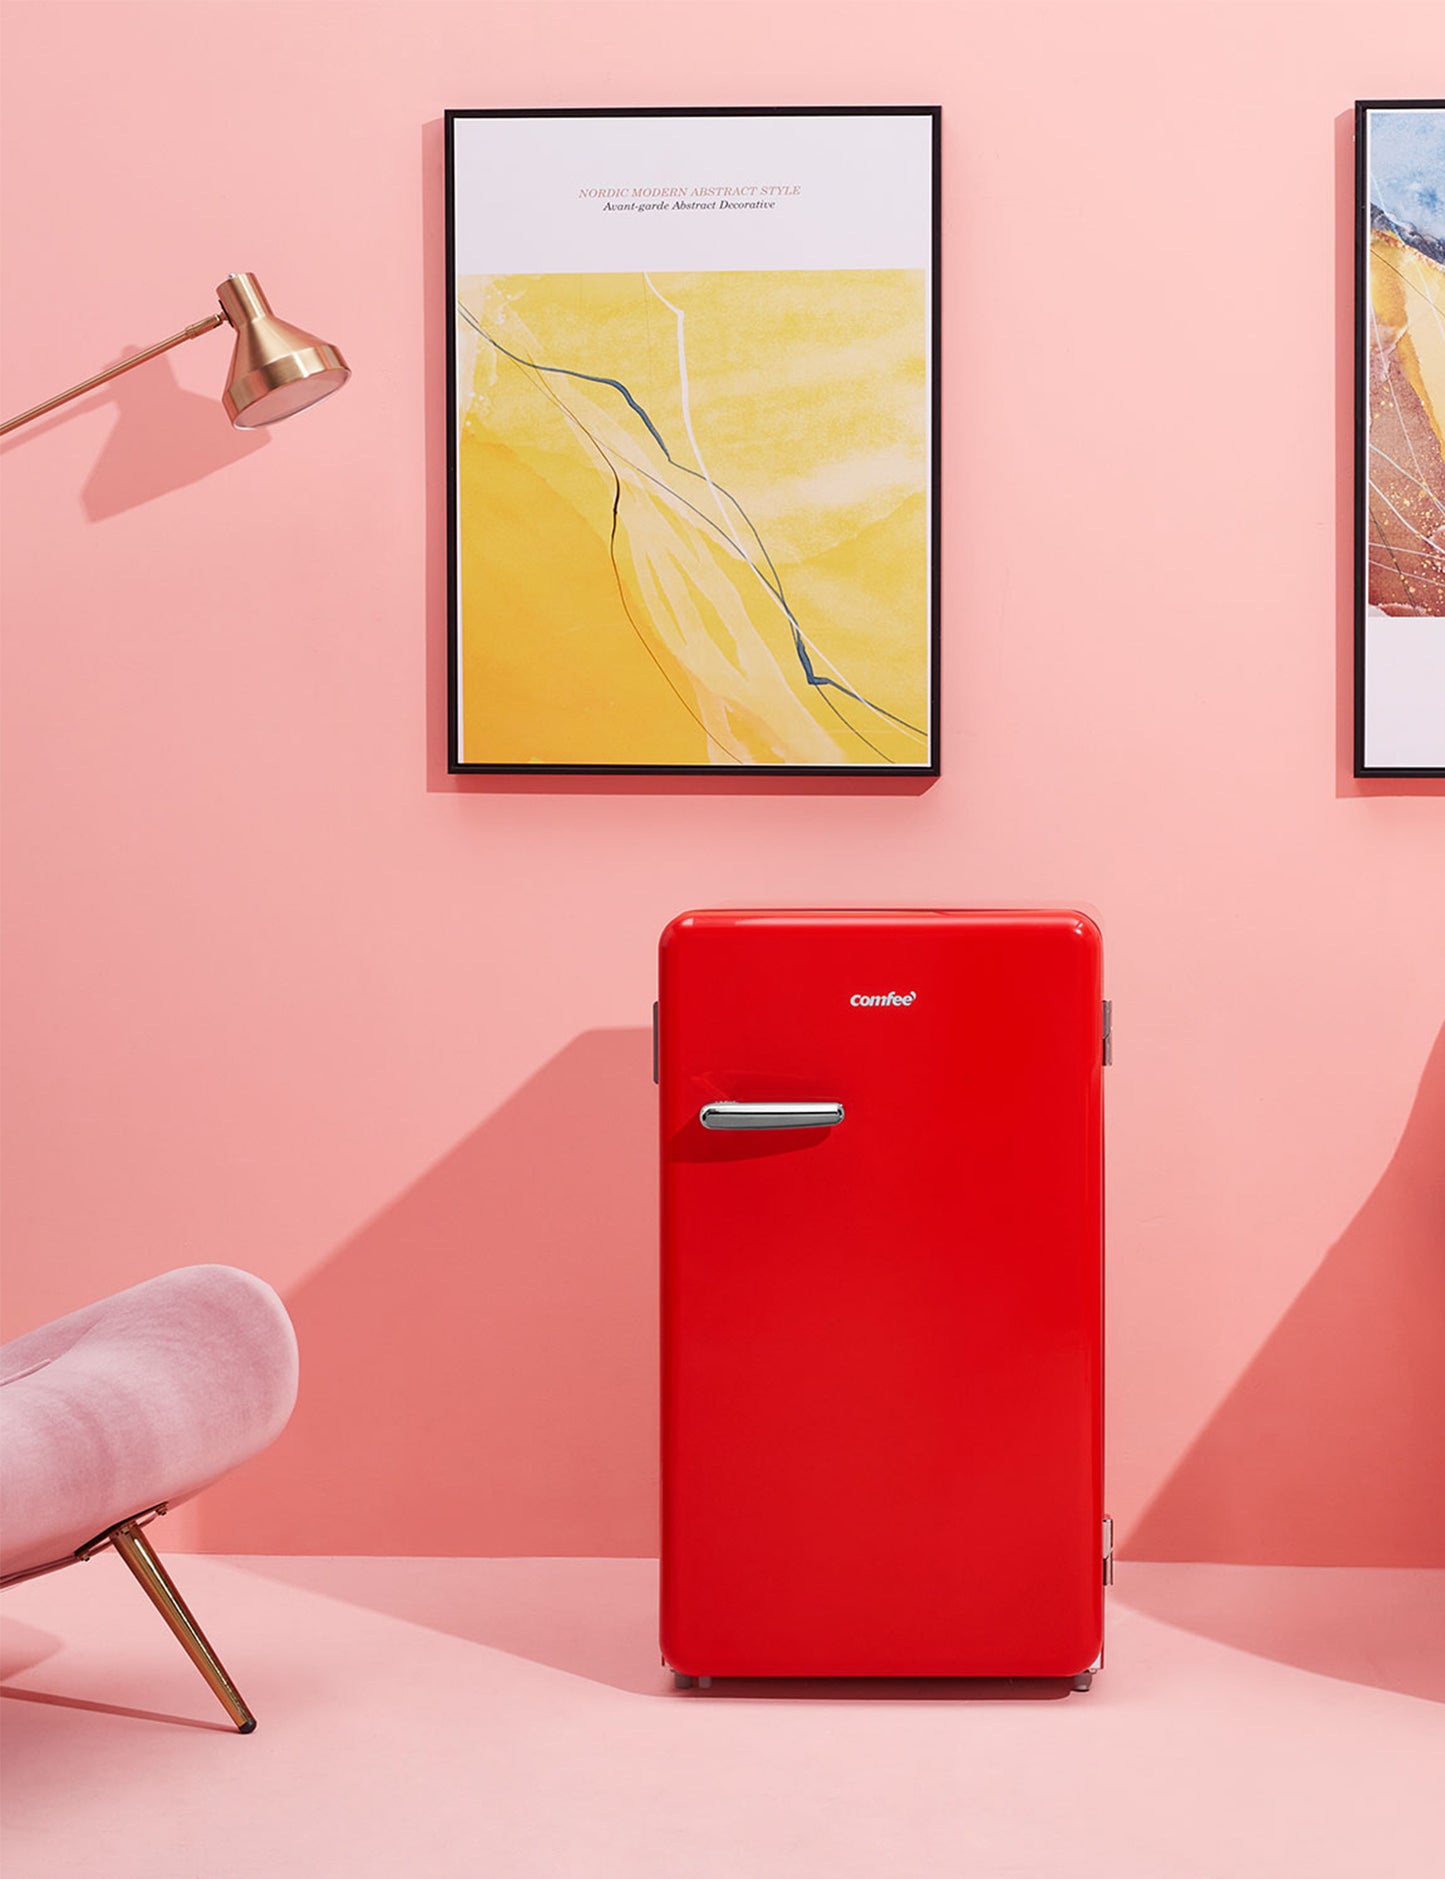 red retro style refrigerator in a stylish pink interior next to a pink couch